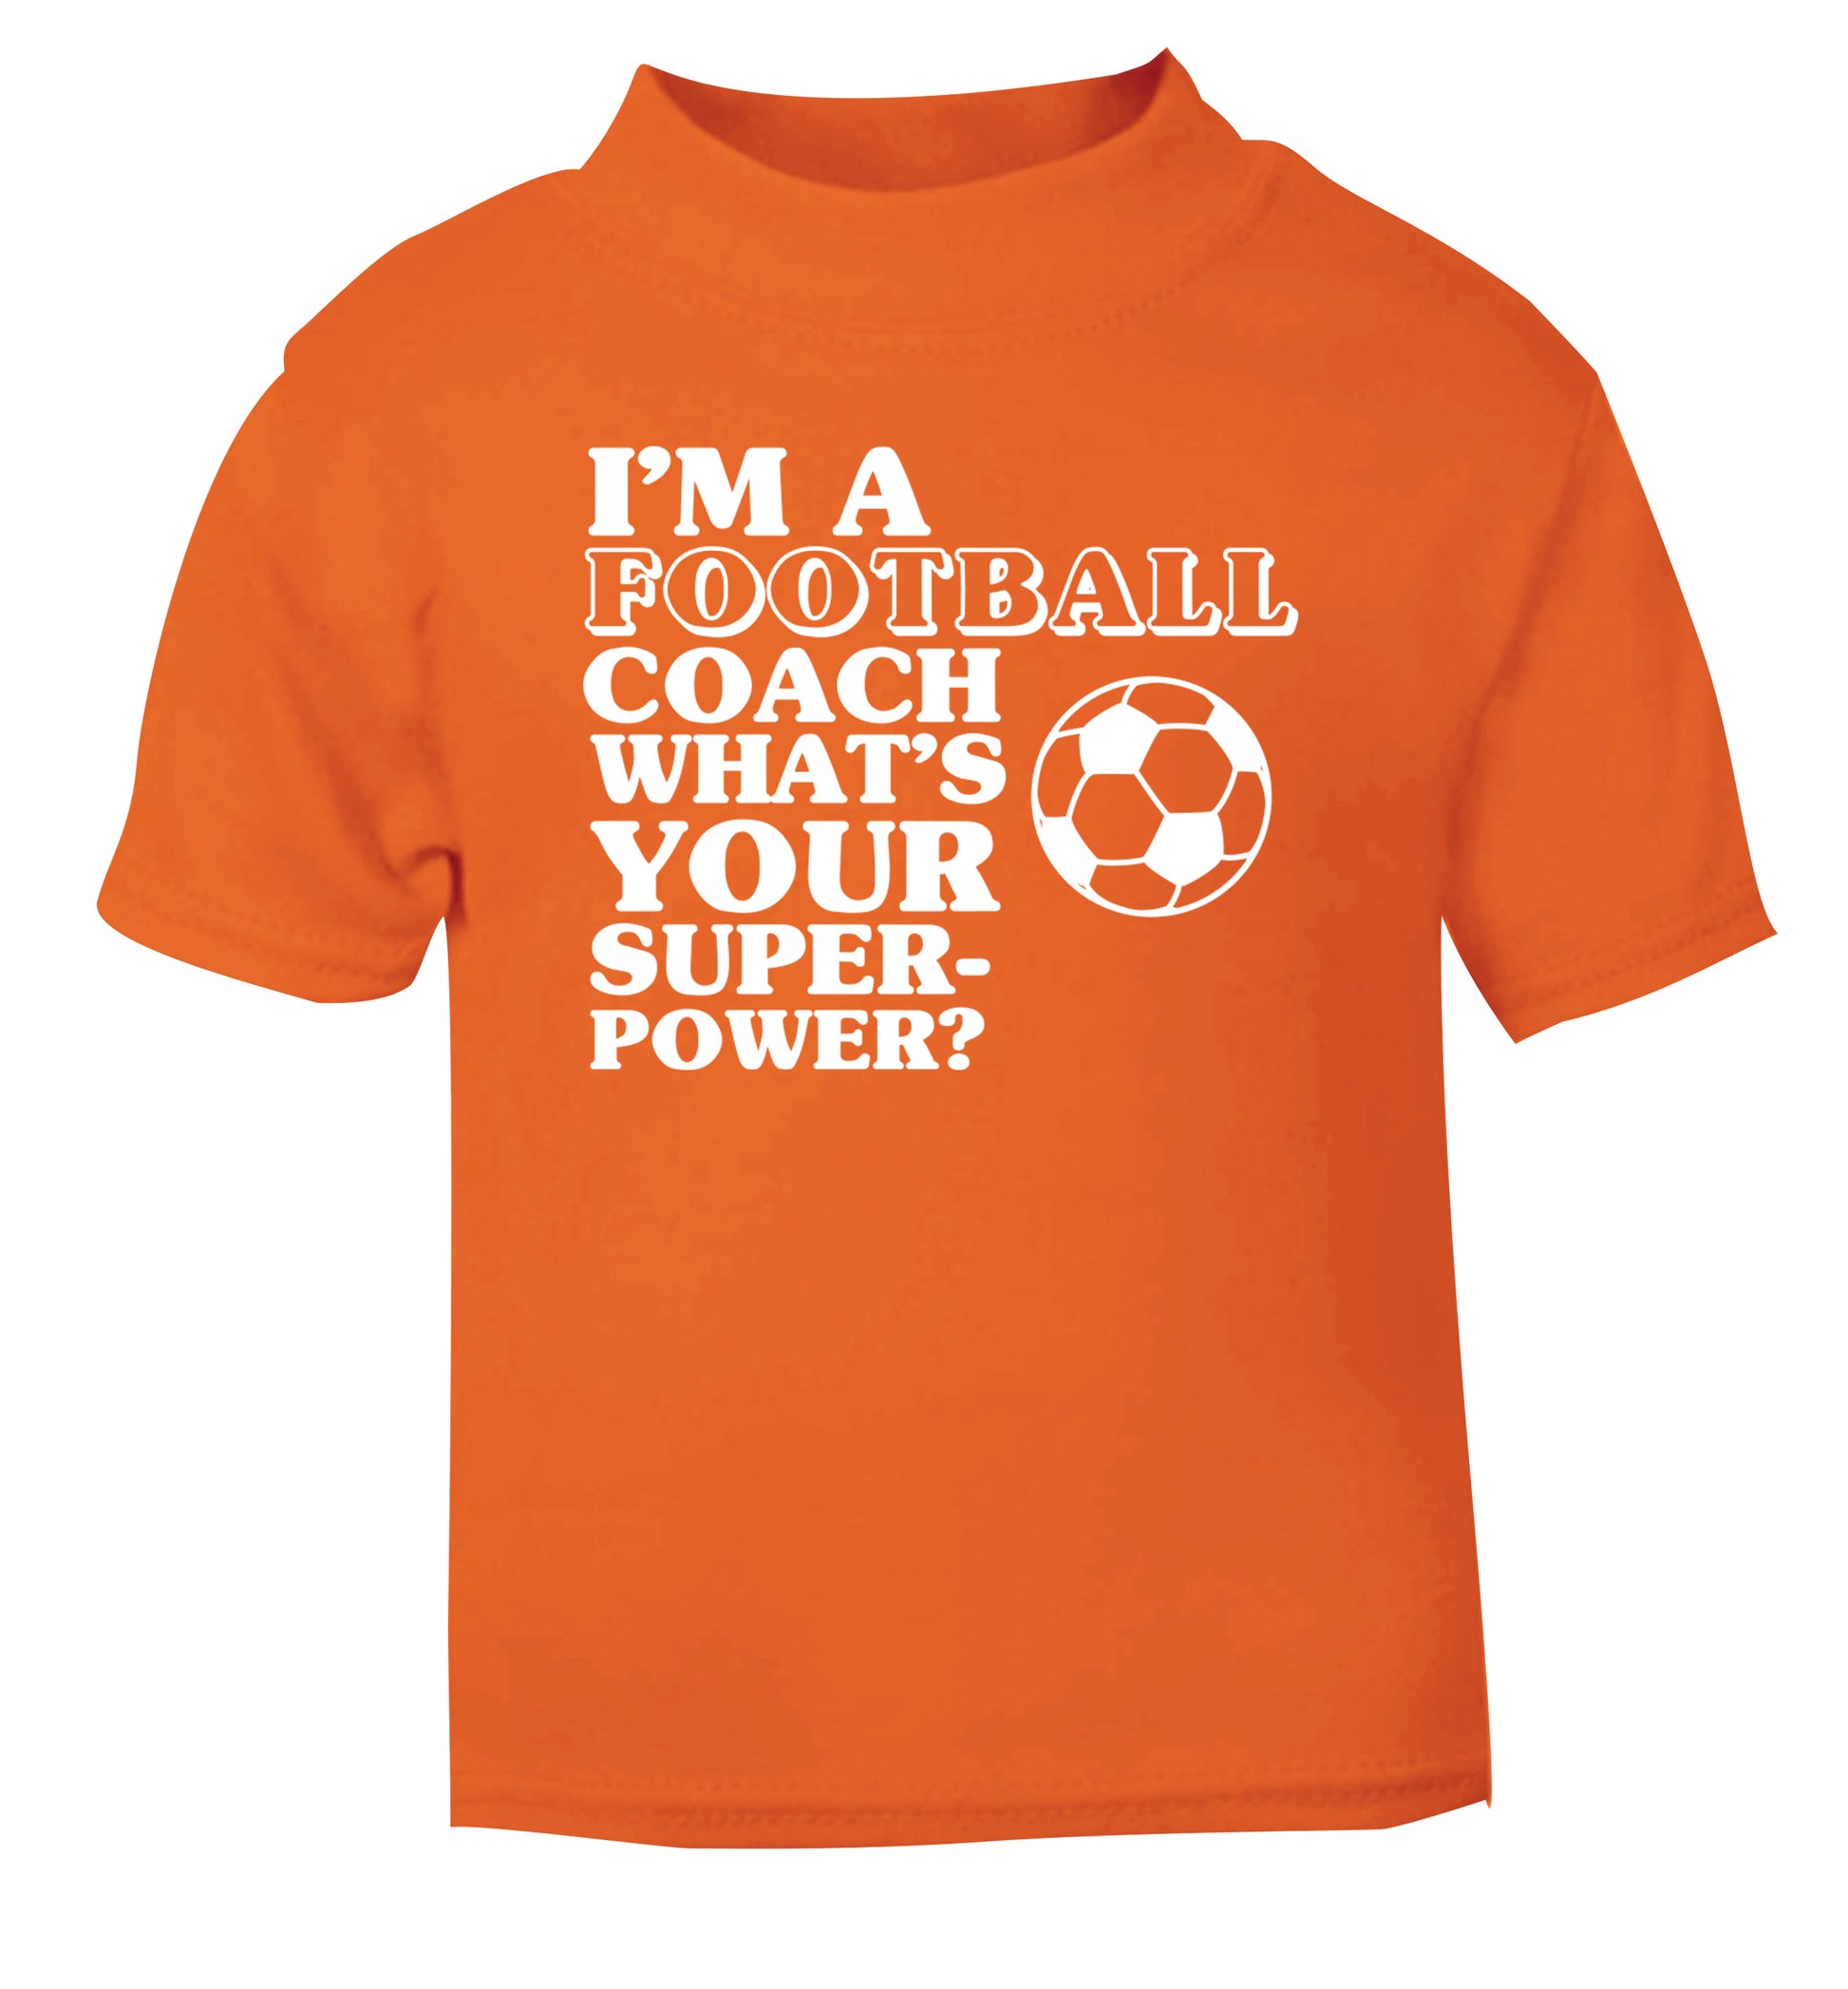 I'm a football coach what's your superpower? orange Baby Toddler Tshirt 2 Years